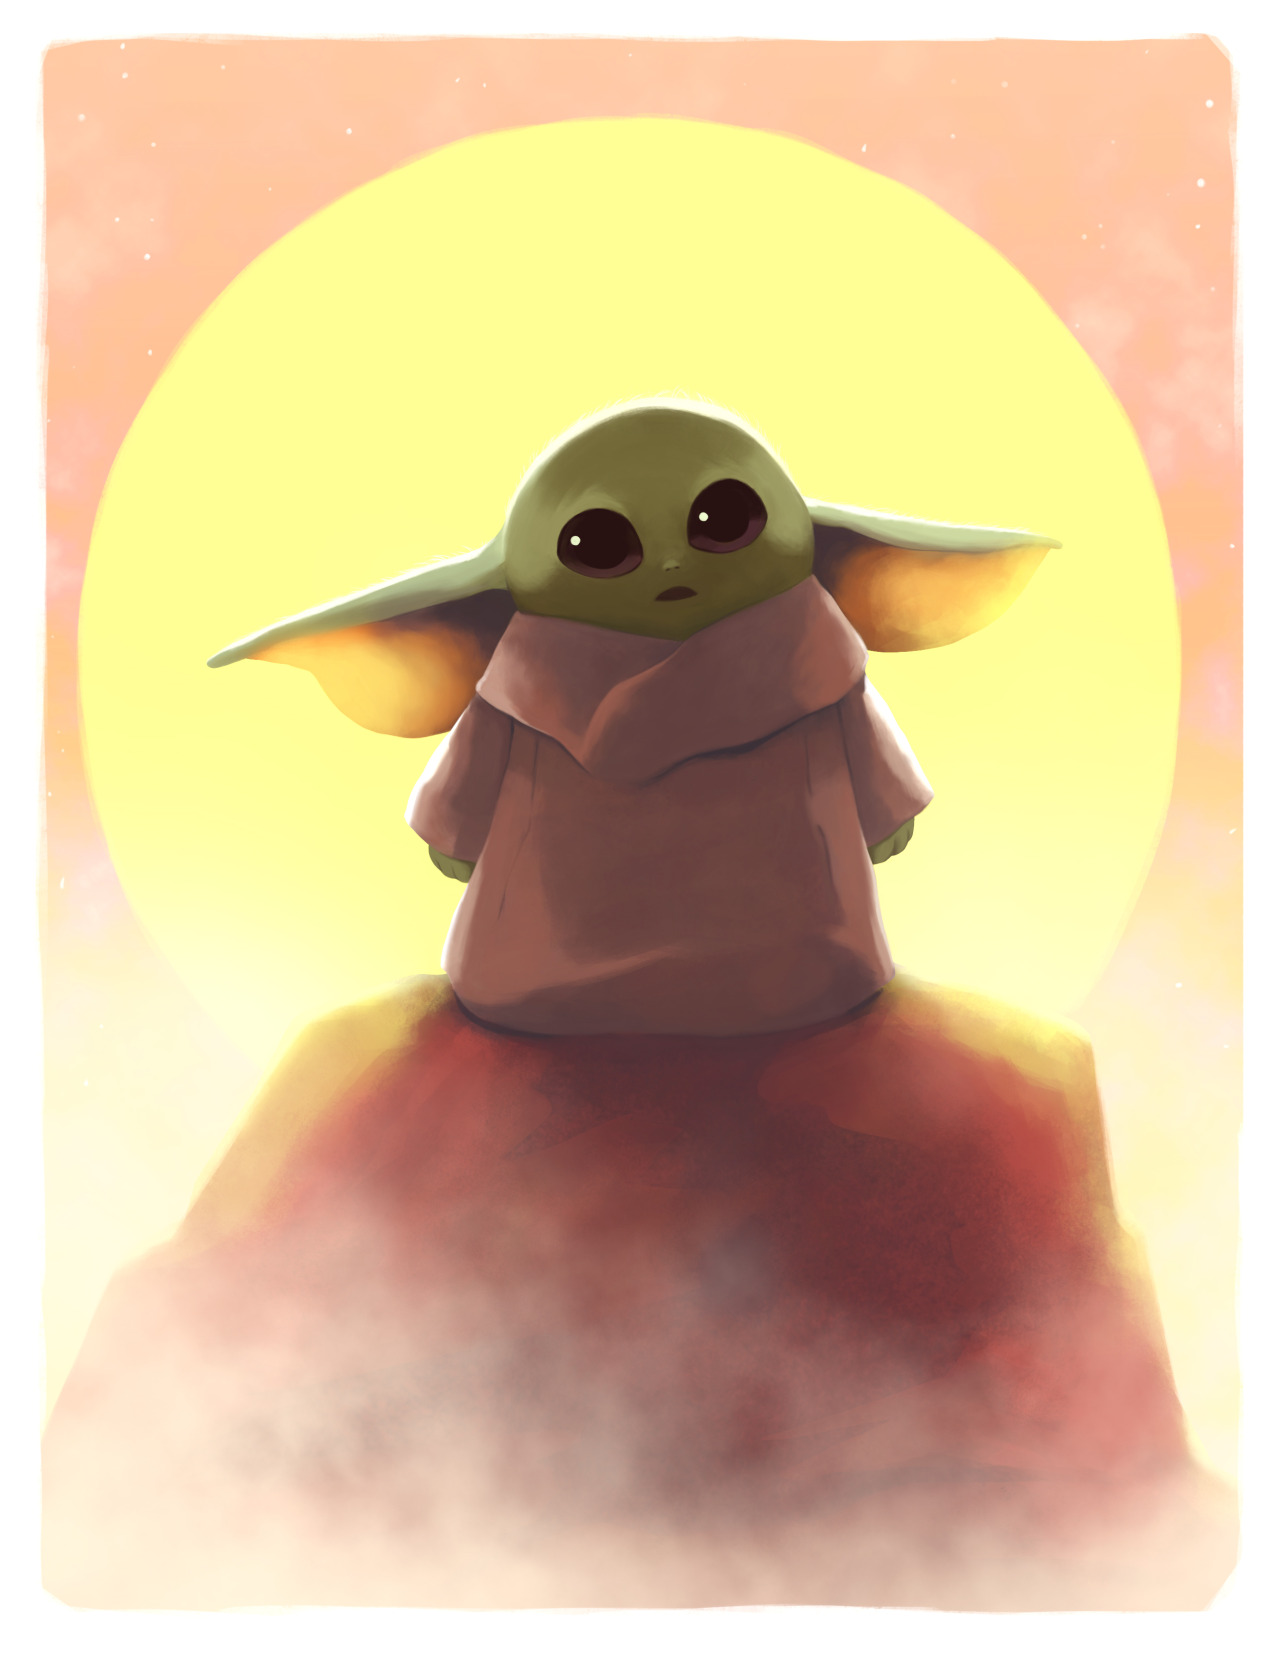 Leann Hill Art - Star Wars The Child / Baby Yoda From The Mandalorian (Small)